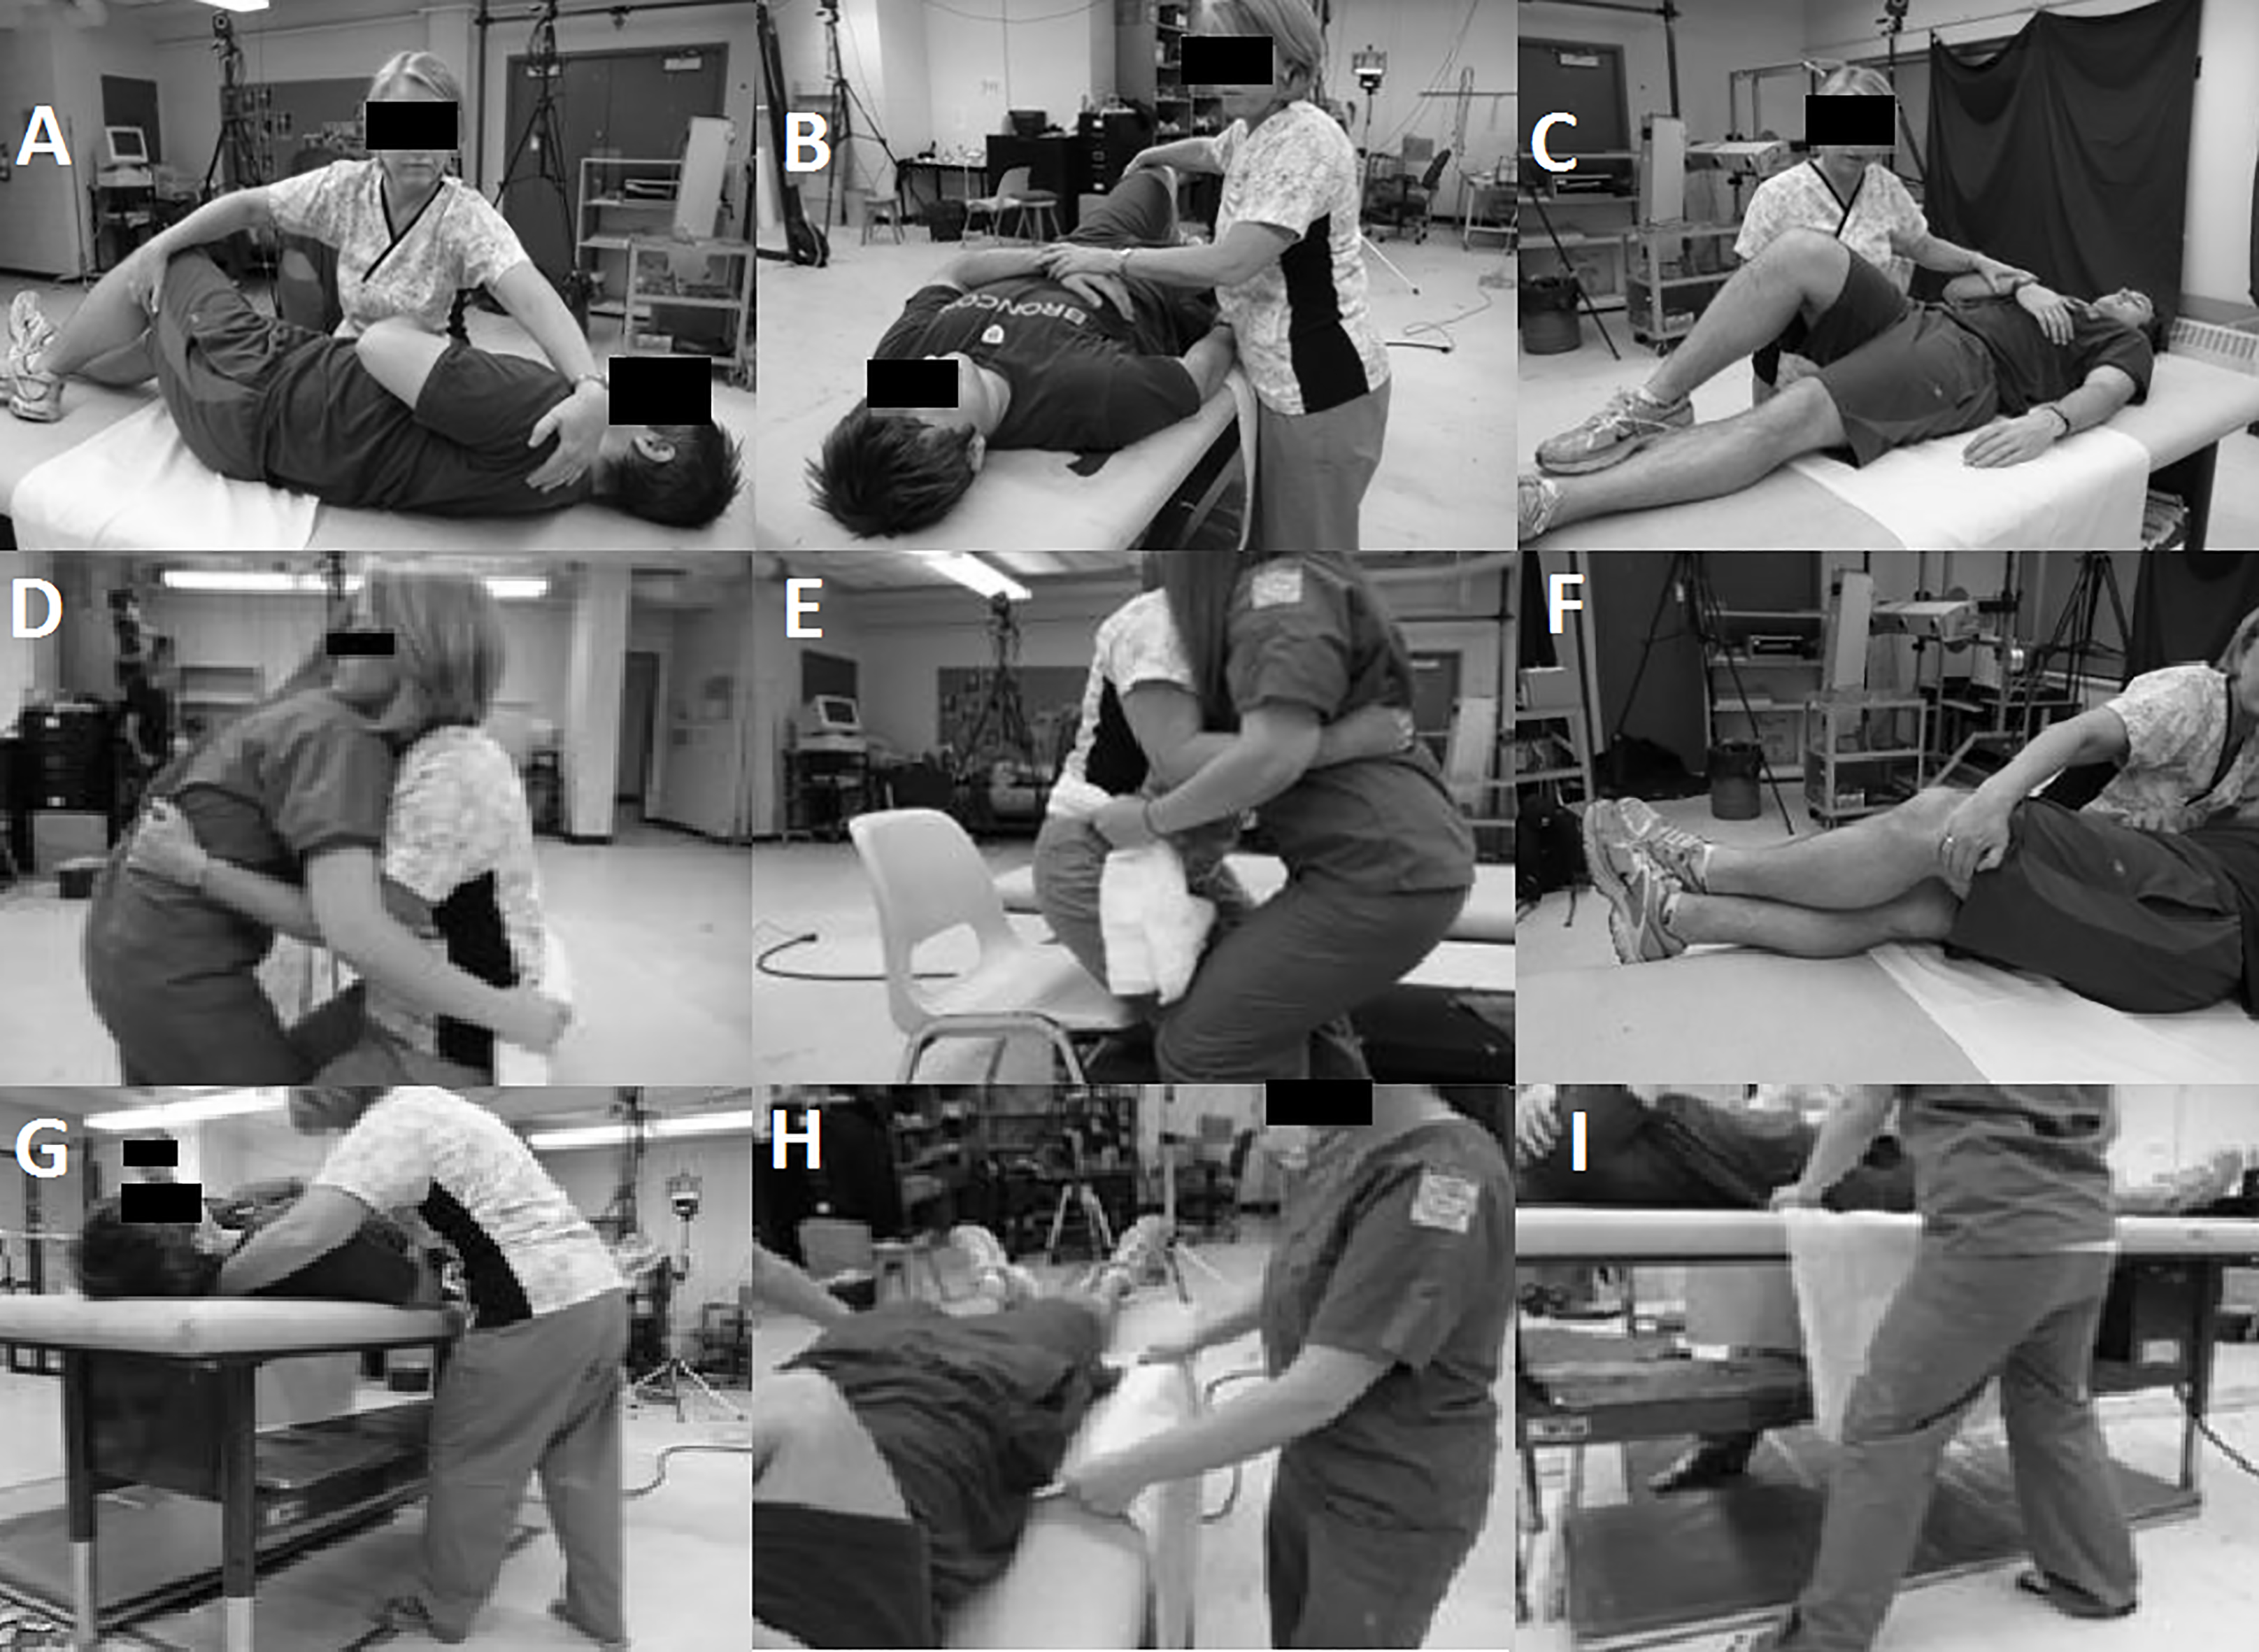 Example manual patient handling pictures that would accompany detailed descriptions on how to properly perform the recommended techniques. A: Turn Toward initiation; B: Turn Toward; C: Turn Away; D: Sit-to-Chair lift; E: Sit-to-Chair lower; F: Lie-to-Sit hand position; G: Lie-to-Sit foot position; H: Reposition hand position; I: Reposition foot position.